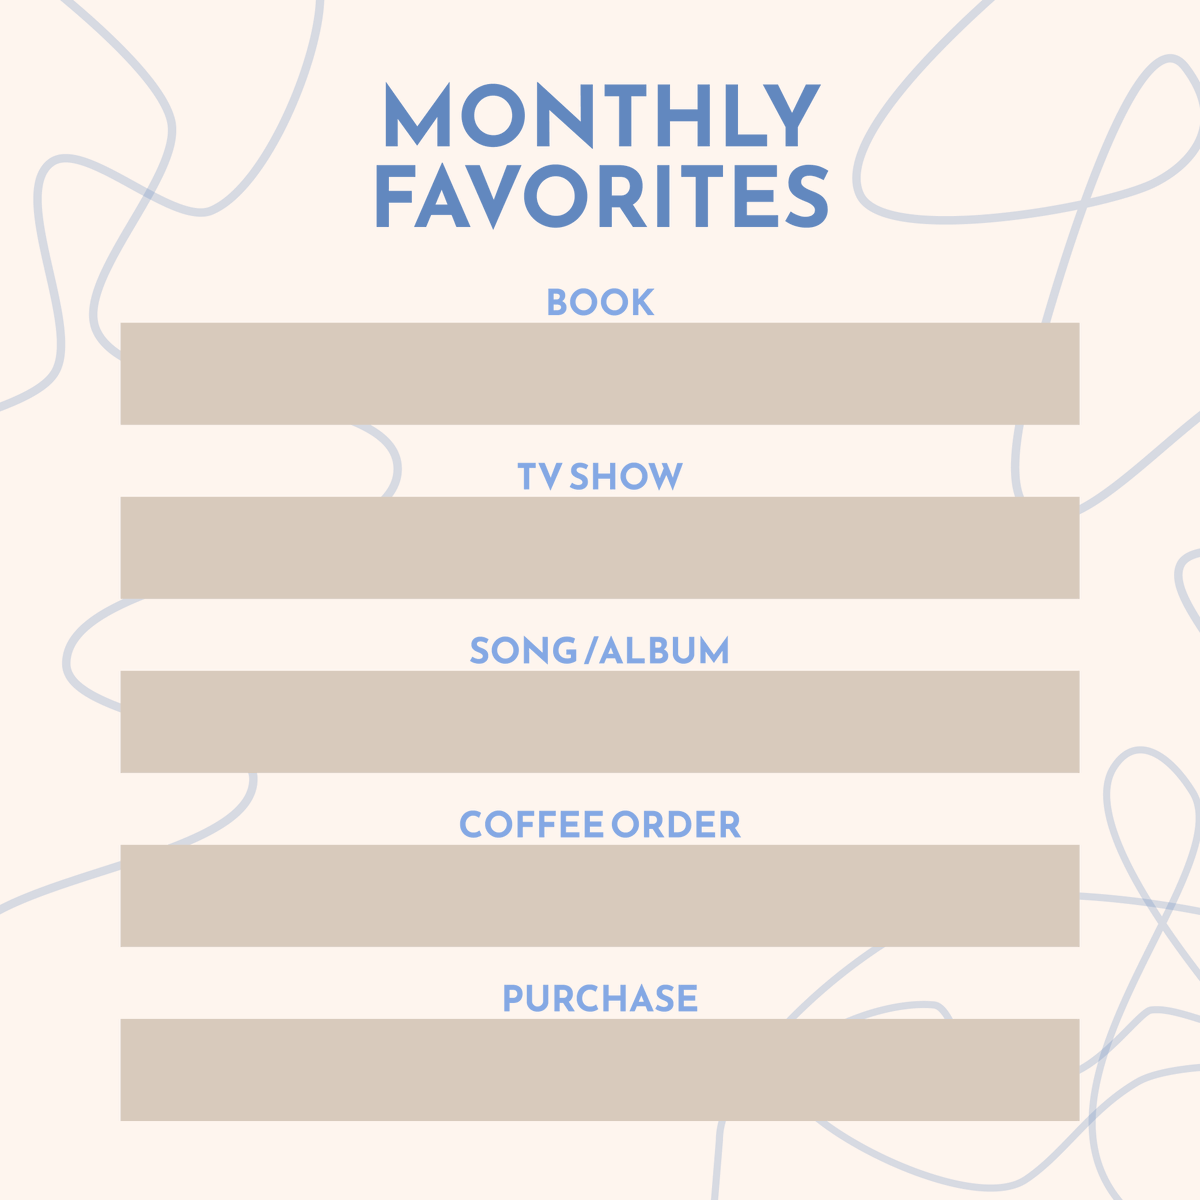 What are a few things you've been loving this month? #MonthlyFavorites
CurtandPennyScroggins